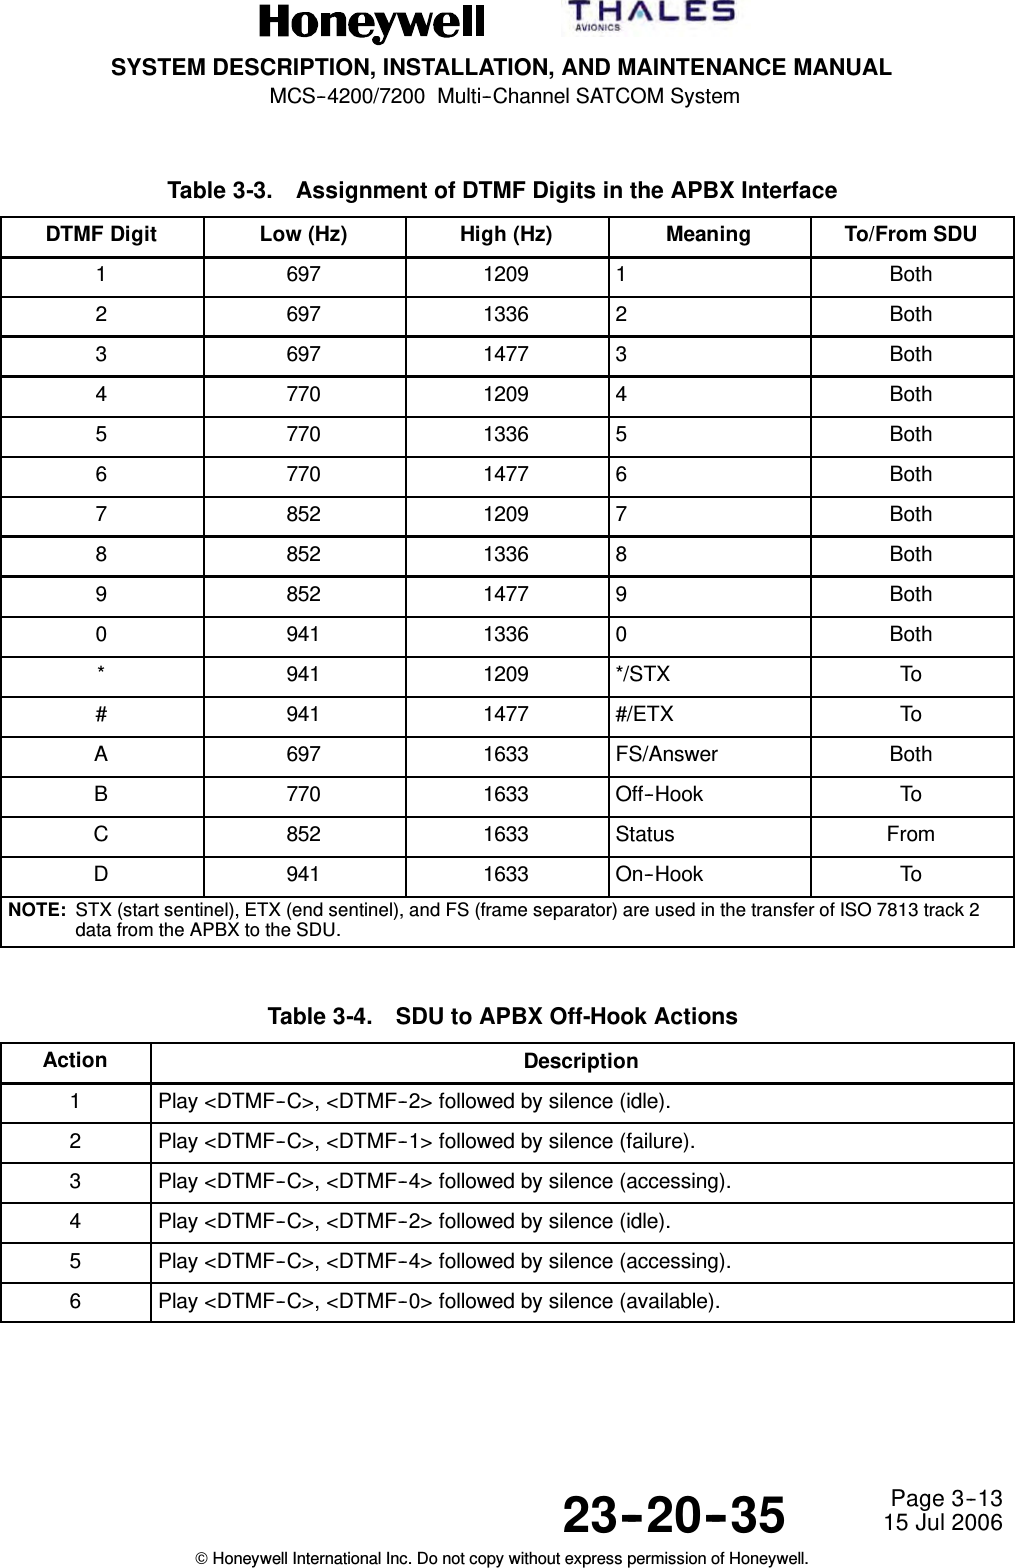 SYSTEM DESCRIPTION, INSTALLATION, AND MAINTENANCE MANUALMCS--4200/7200 Multi--Channel SATCOM System23--20--35 15 Jul 2006Honeywell International Inc. Do not copy without express permission of Honeywell.Page 3--13Table 3-3. Assignment of DTMF Digits in the APBX InterfaceDTMF Digit Low (Hz) High (Hz) Meaning To/From SDU1697 1209 1Both2697 1336 2Both3697 1477 3Both4770 1209 4Both5770 1336 5Both6770 1477 6Both7852 1209 7Both8852 1336 8Both9852 1477 9Both0941 1336 0Both*941 1209 */STX To#941 1477 #/ETX ToA697 1633 FS/Answer BothB770 1633 Off--Hook ToC852 1633 Status FromD941 1633 On--Hook ToNOTE: STX (start sentinel), ETX (end sentinel), and FS (frame separator) are used in the transfer of ISO 7813 track 2data from the APBX to the SDU.Table 3-4. SDU to APBX Off-Hook ActionsAction Description1Play &lt;DTMF--C&gt;, &lt;DTMF--2&gt; followed by silence (idle).2Play &lt;DTMF--C&gt;, &lt;DTMF--1&gt; followed by silence (failure).3Play &lt;DTMF--C&gt;, &lt;DTMF--4&gt; followed by silence (accessing).4Play &lt;DTMF--C&gt;, &lt;DTMF--2&gt; followed by silence (idle).5Play &lt;DTMF--C&gt;, &lt;DTMF--4&gt; followed by silence (accessing).6Play &lt;DTMF--C&gt;, &lt;DTMF--0&gt; followed by silence (available).